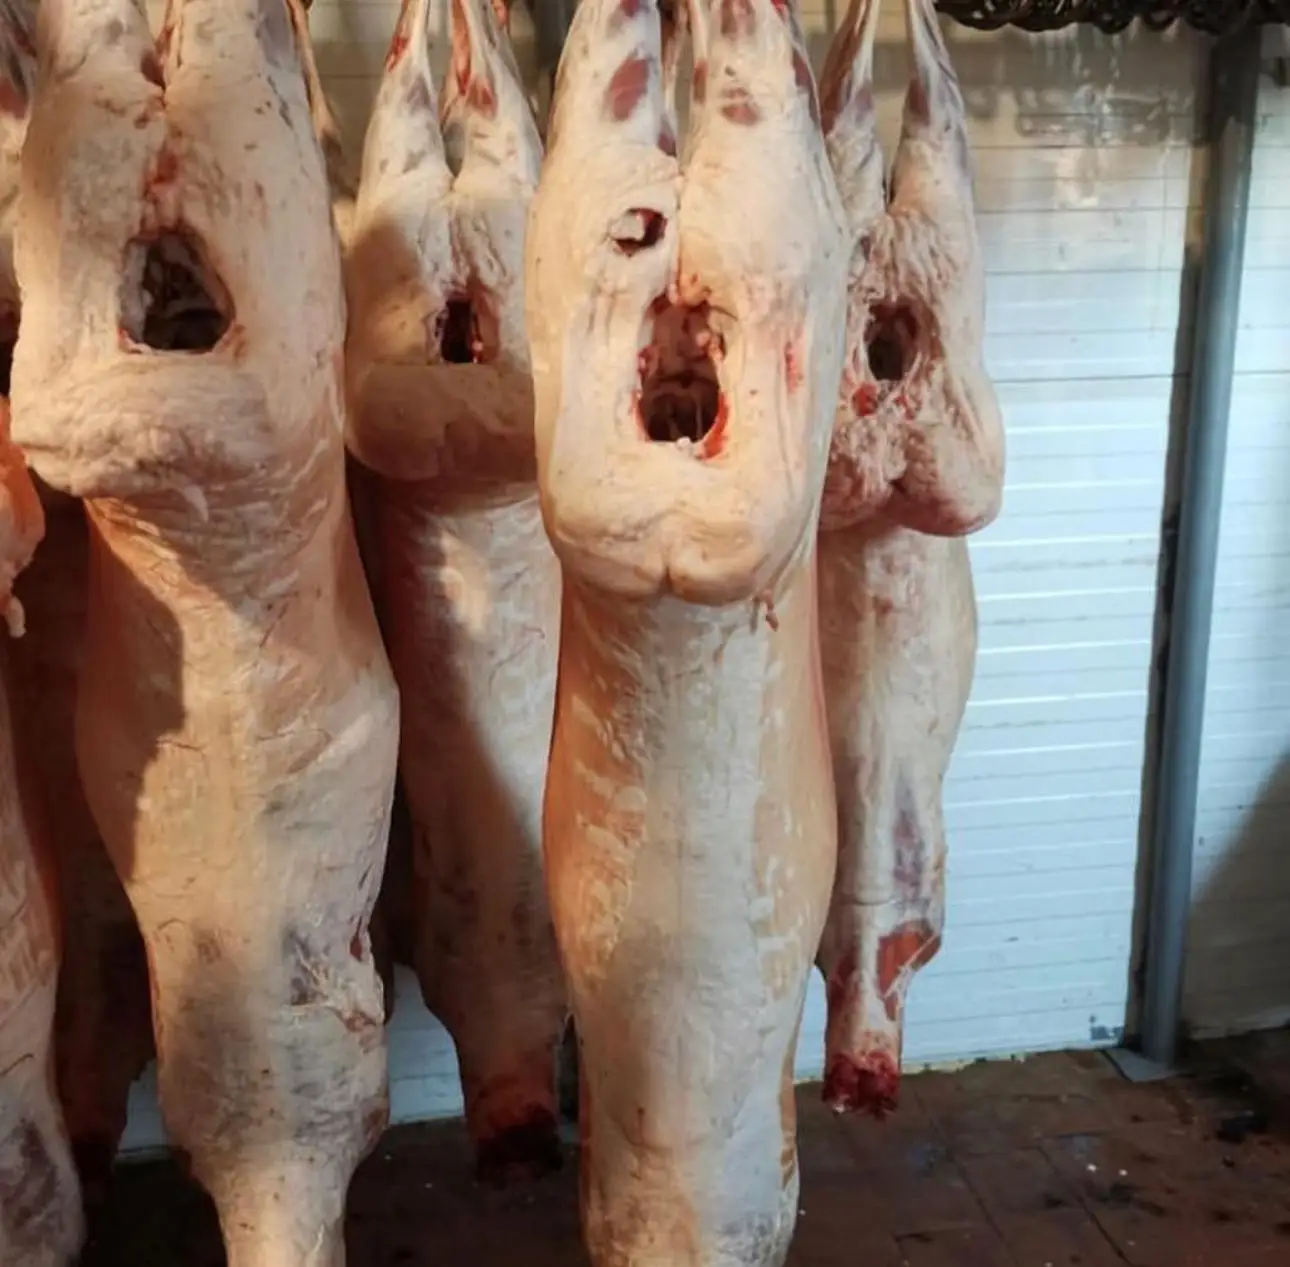 Cleaned Frozen Lamb Tail Fat Lamb Tail Fat for sale  Frozen Lamb Tail Fat  Halal Lamb Tail Fat